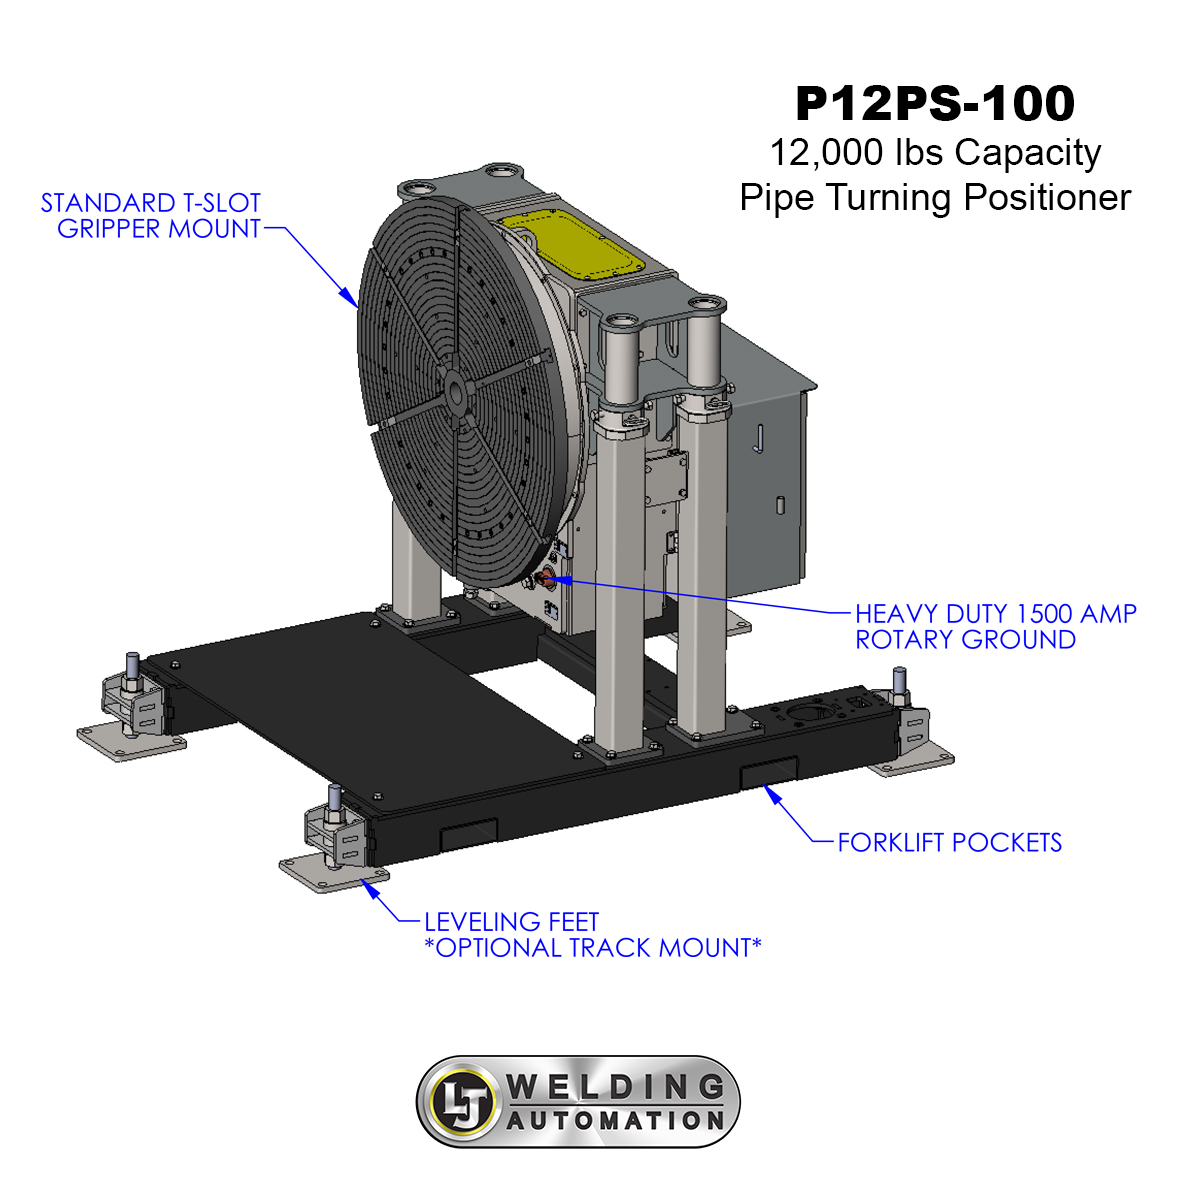 03-12000-lb-Pipe-Turning-Positioner